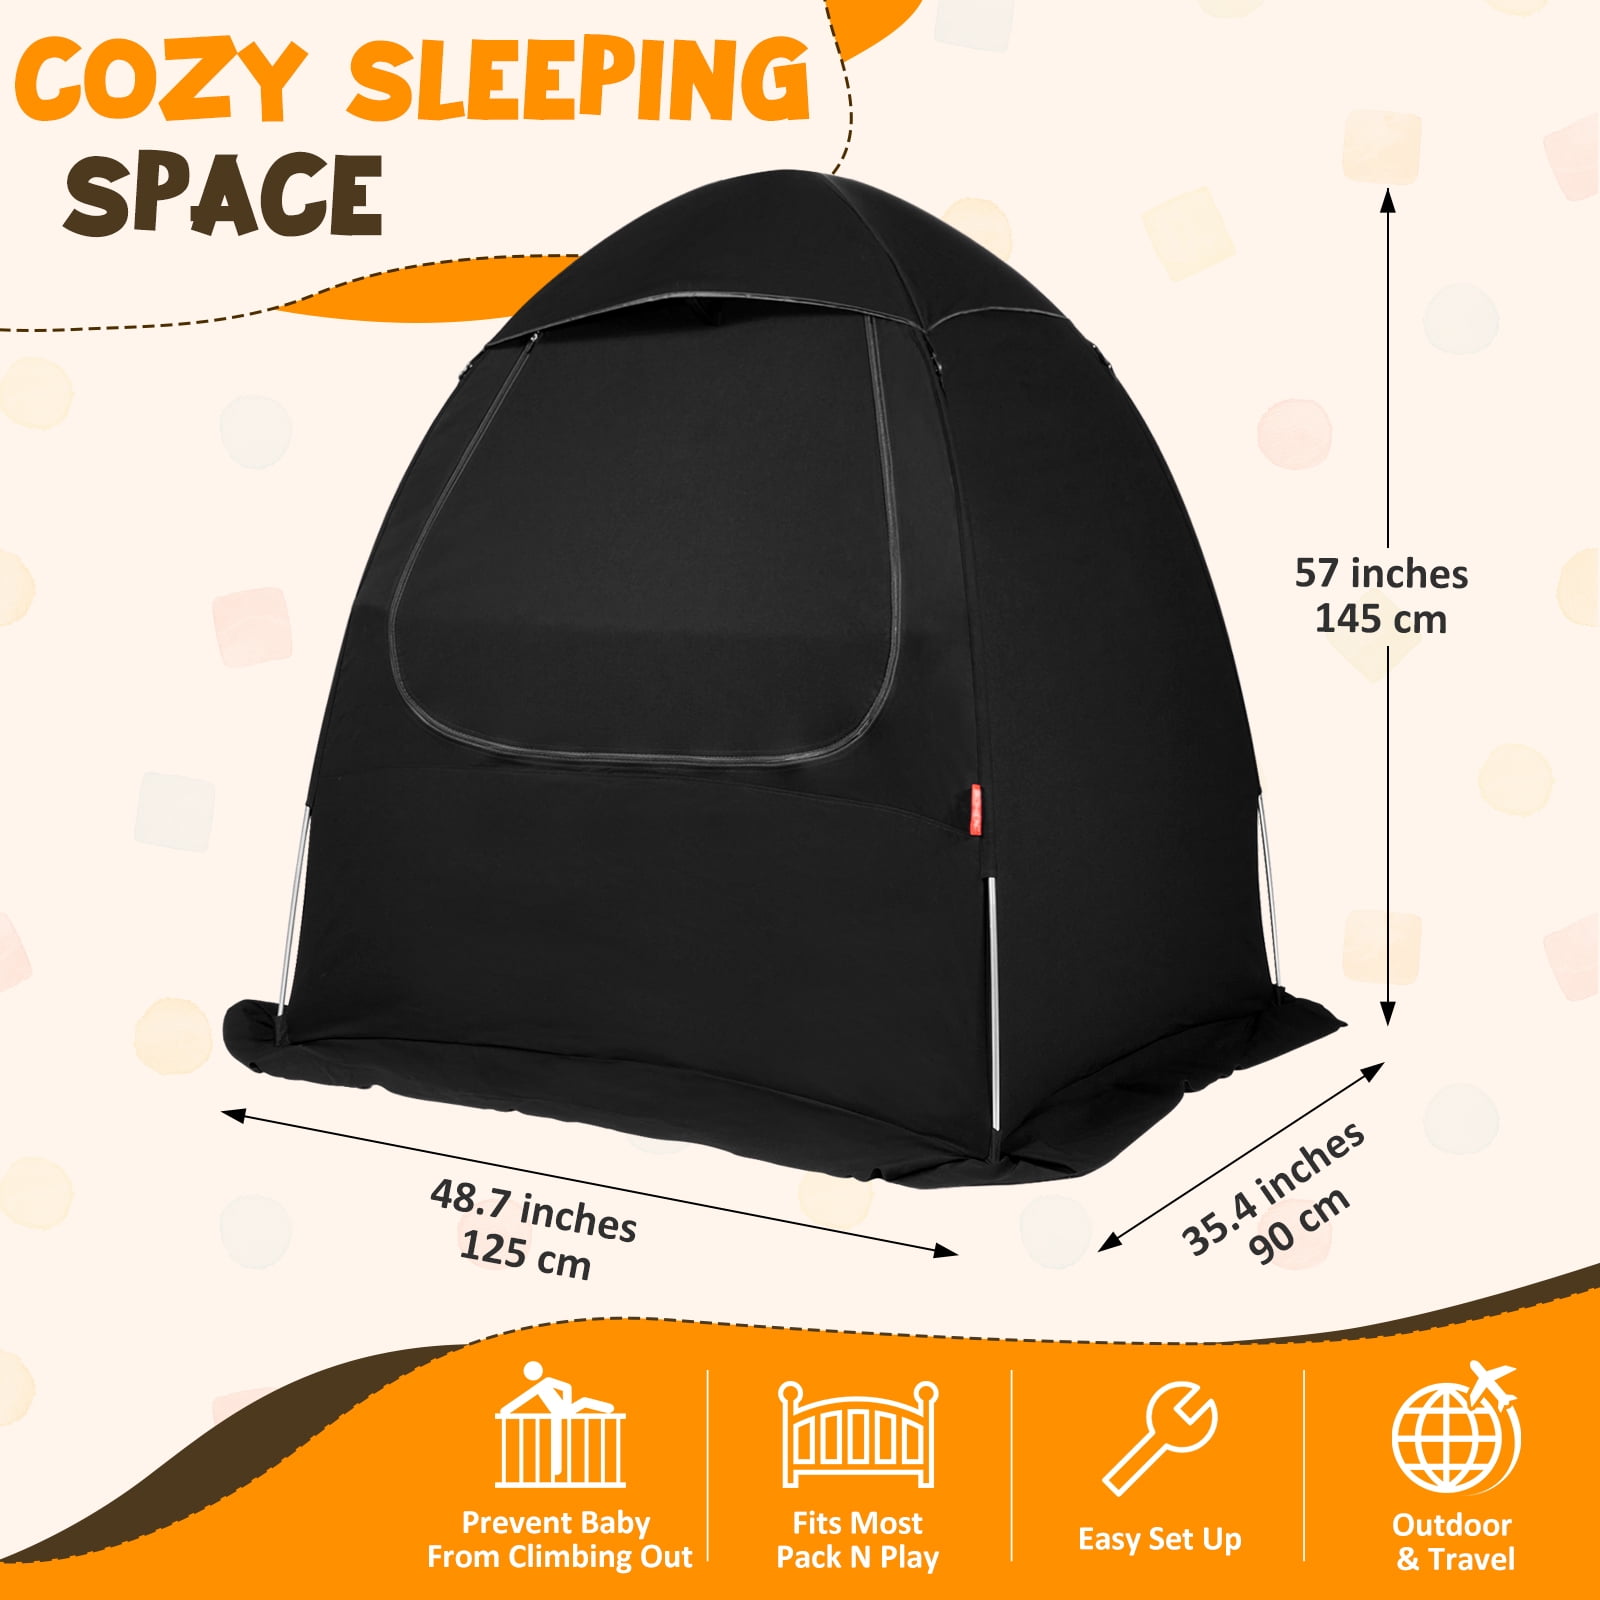 ZTOO Breathable Net Sleep Shade Cover Crib Blackout Cover Stretchable  Breathable Crib Canopy Cover Portable Baby Bed Blackout Tent Safety Compact